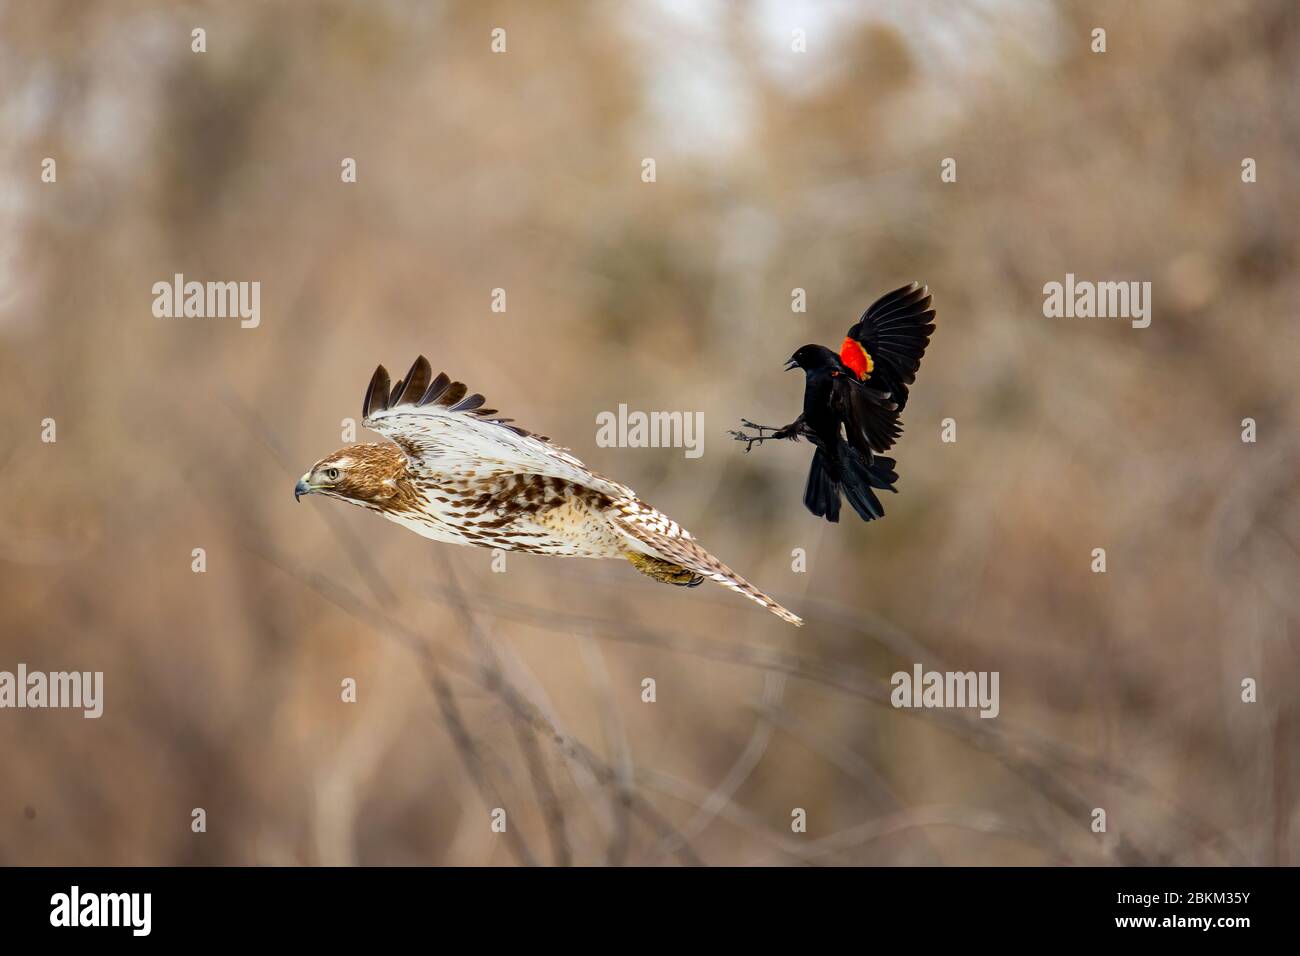 Juvenile Red tailed hawk (Accipitridae) attacked by Red winged black bird (Agelaius phoeniceus) Colorado, USA Stock Photo